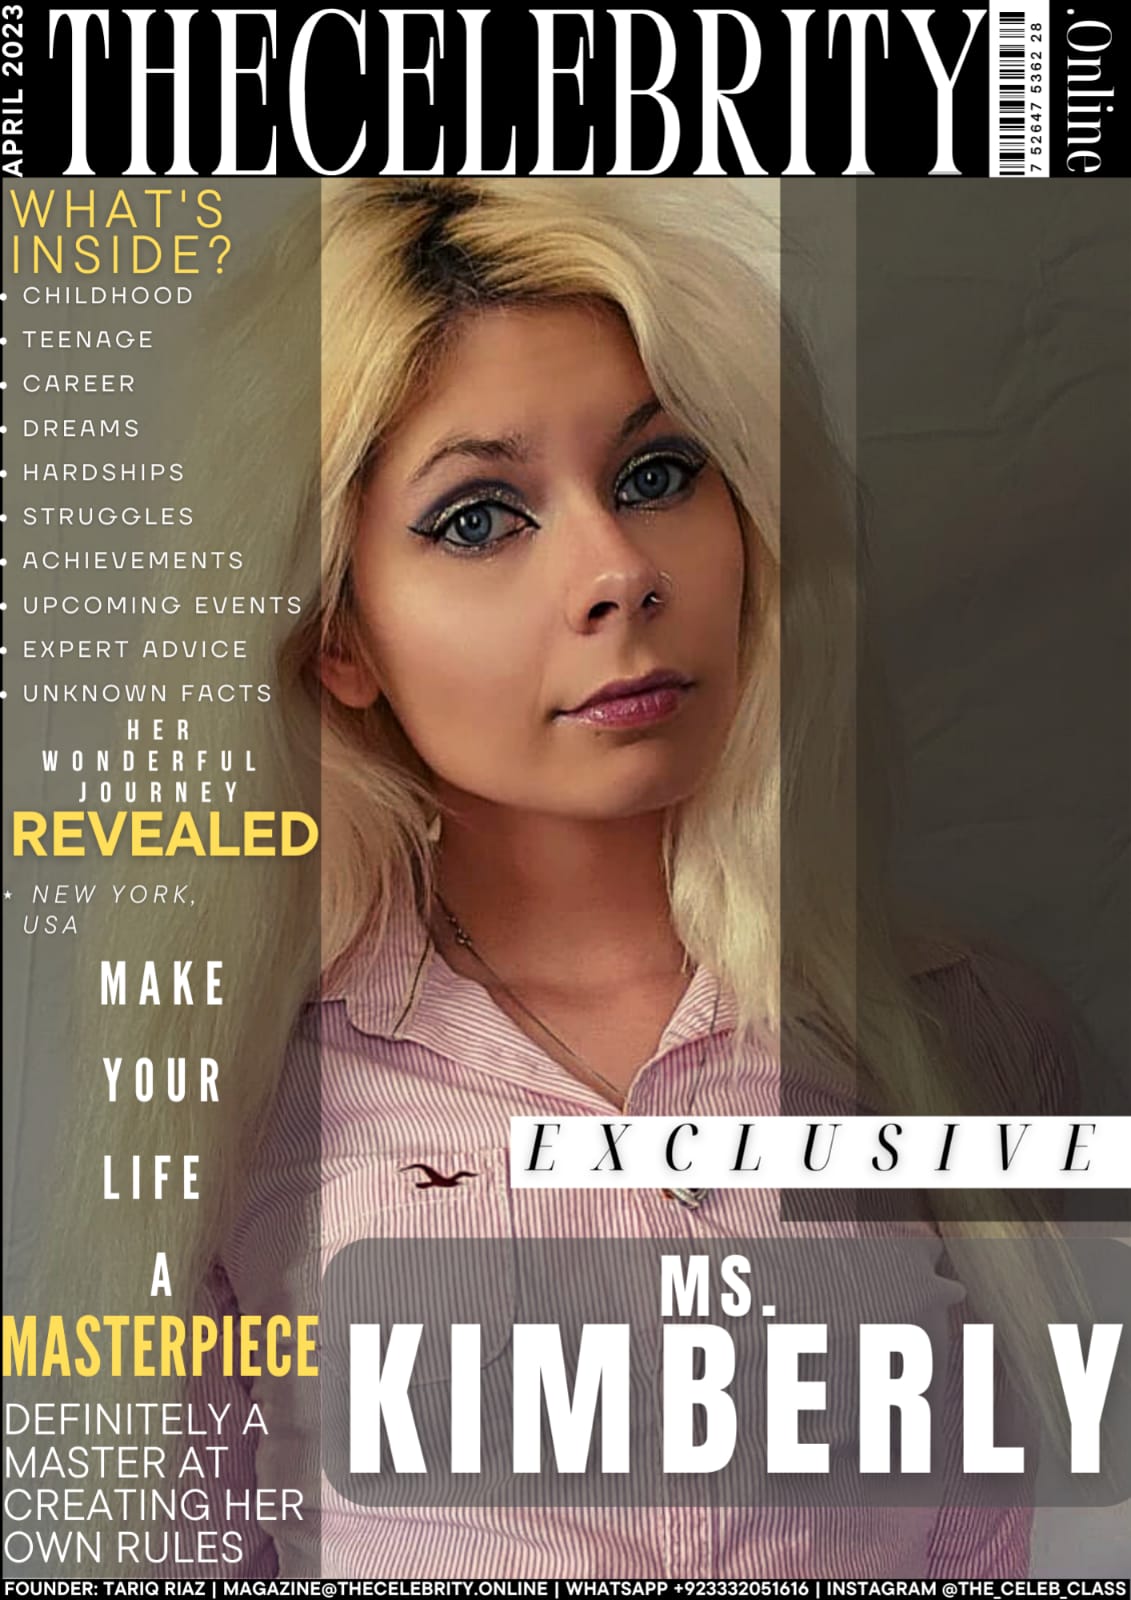 Ms. Kimberly Exclusive Interview – ‘Rejection is a part of the business’